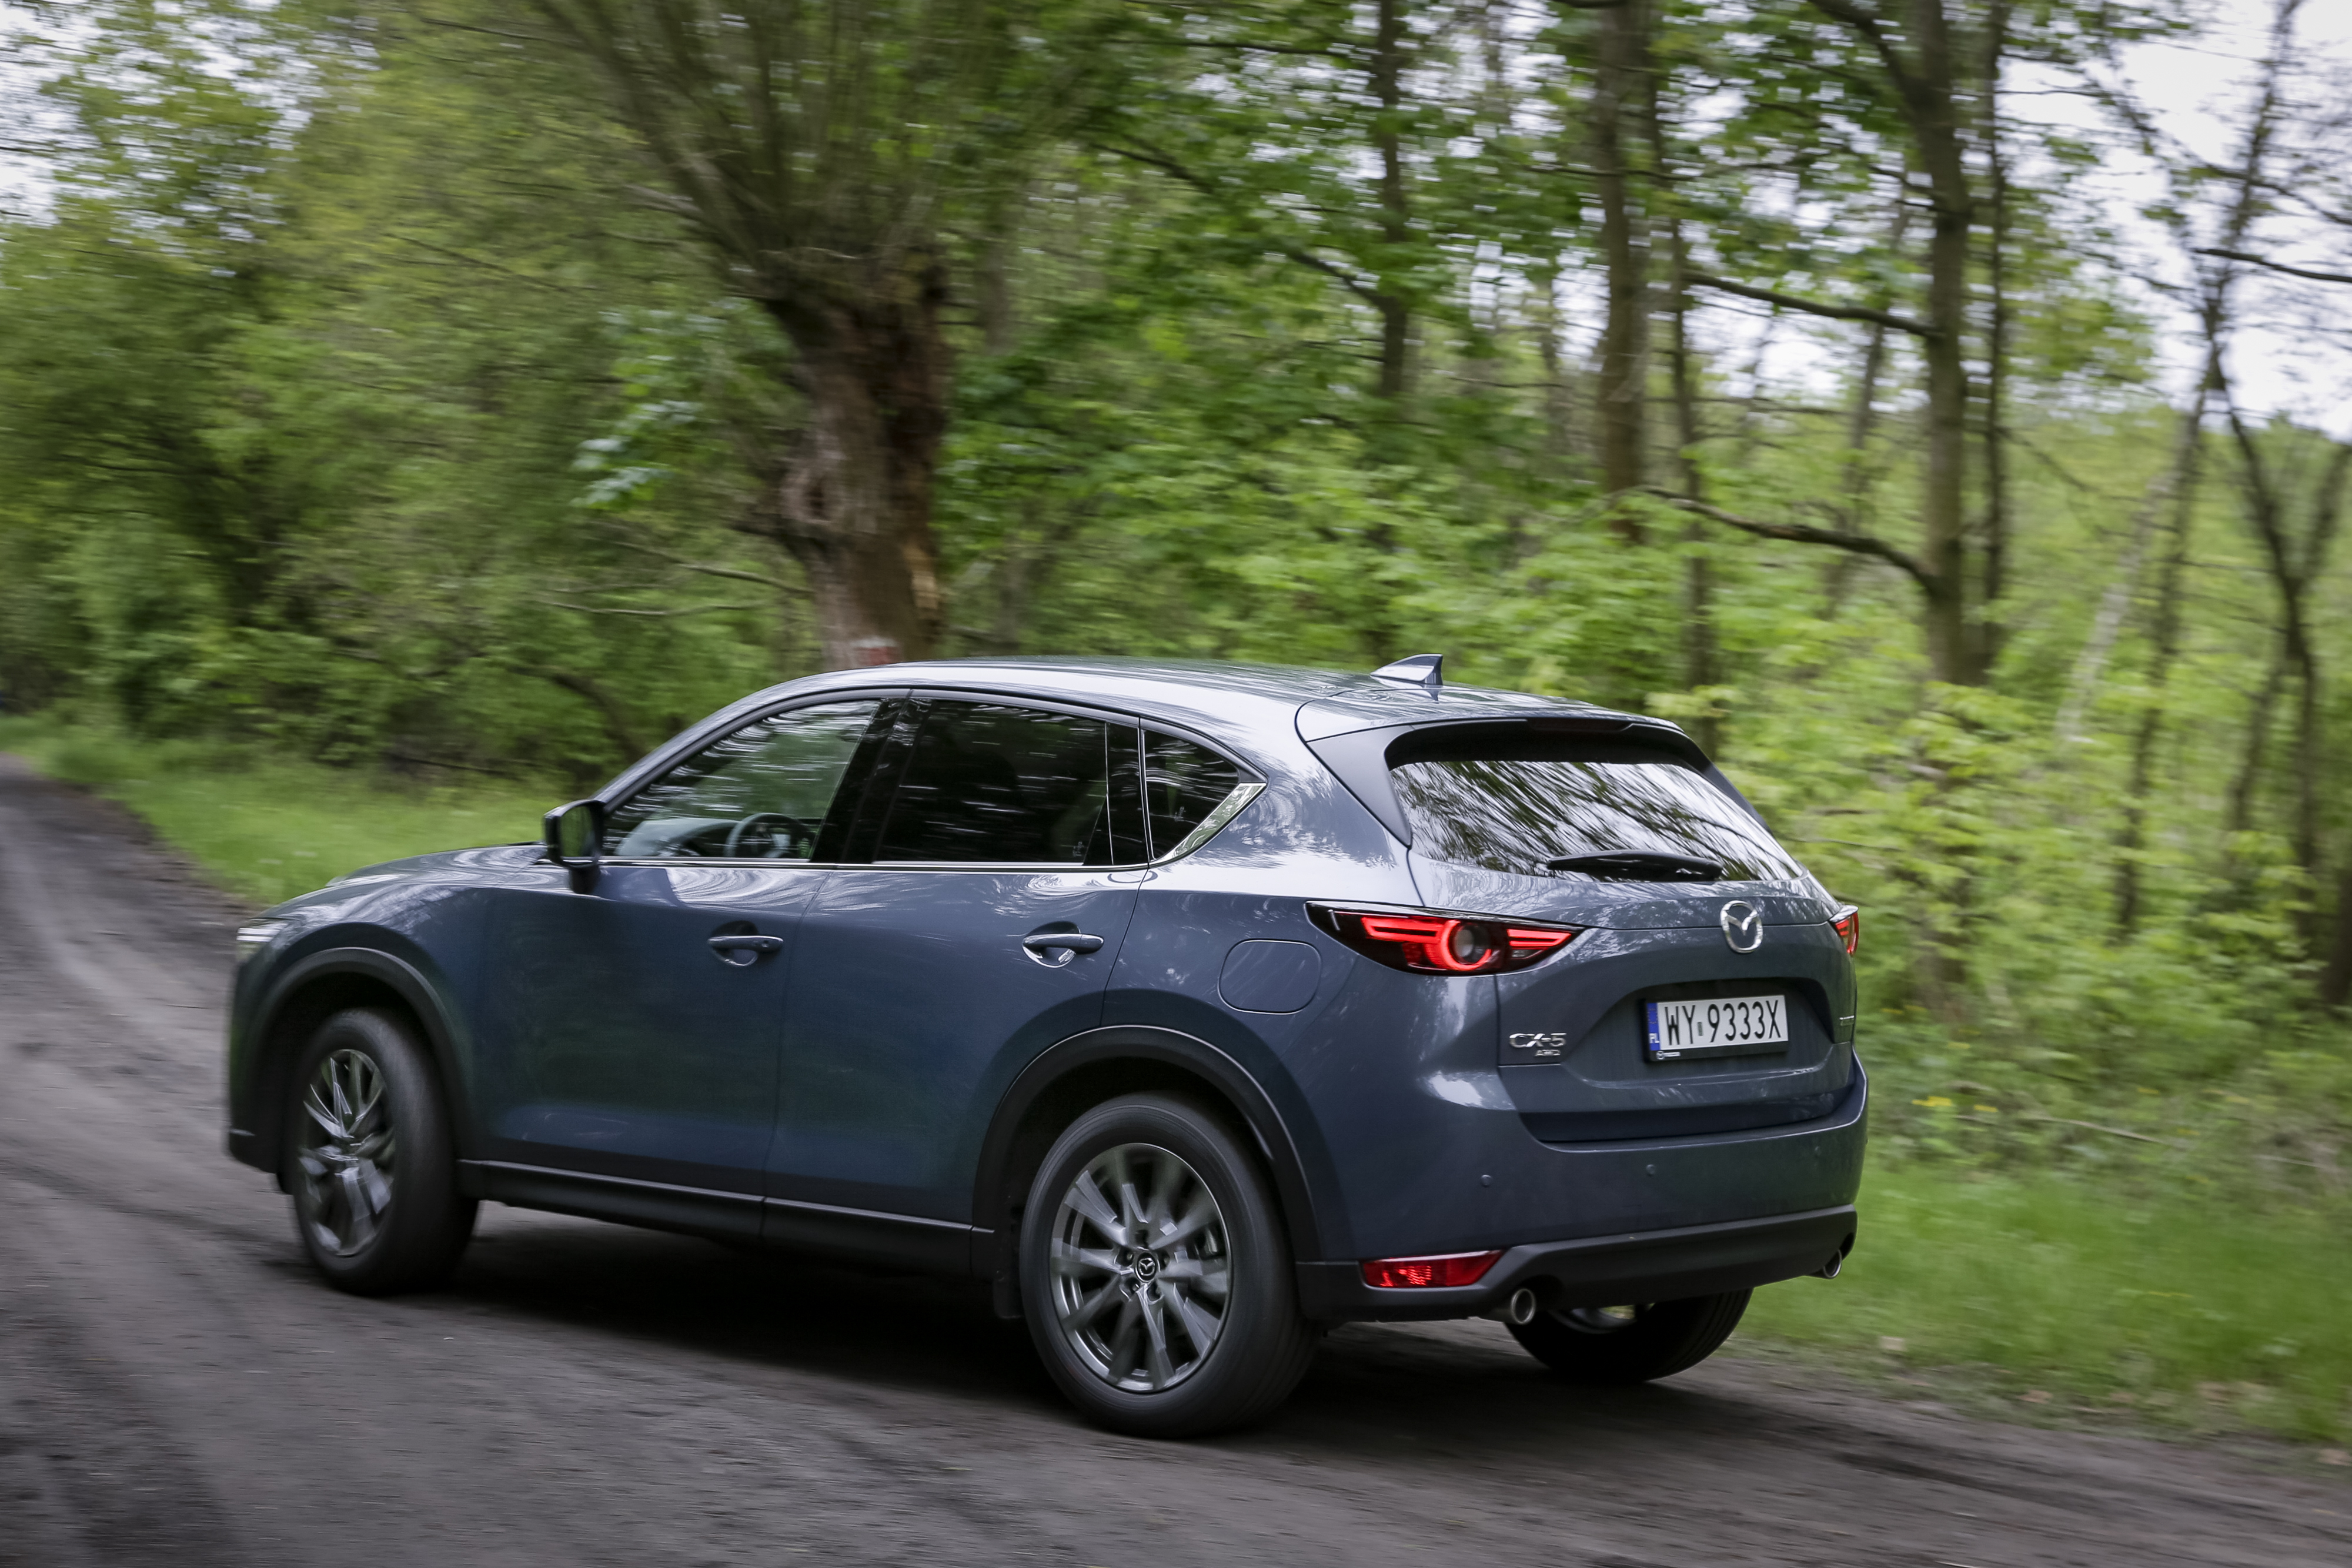 2020 Mazda CX5 in Europe new Polymetal Grey, cylinder deactivation